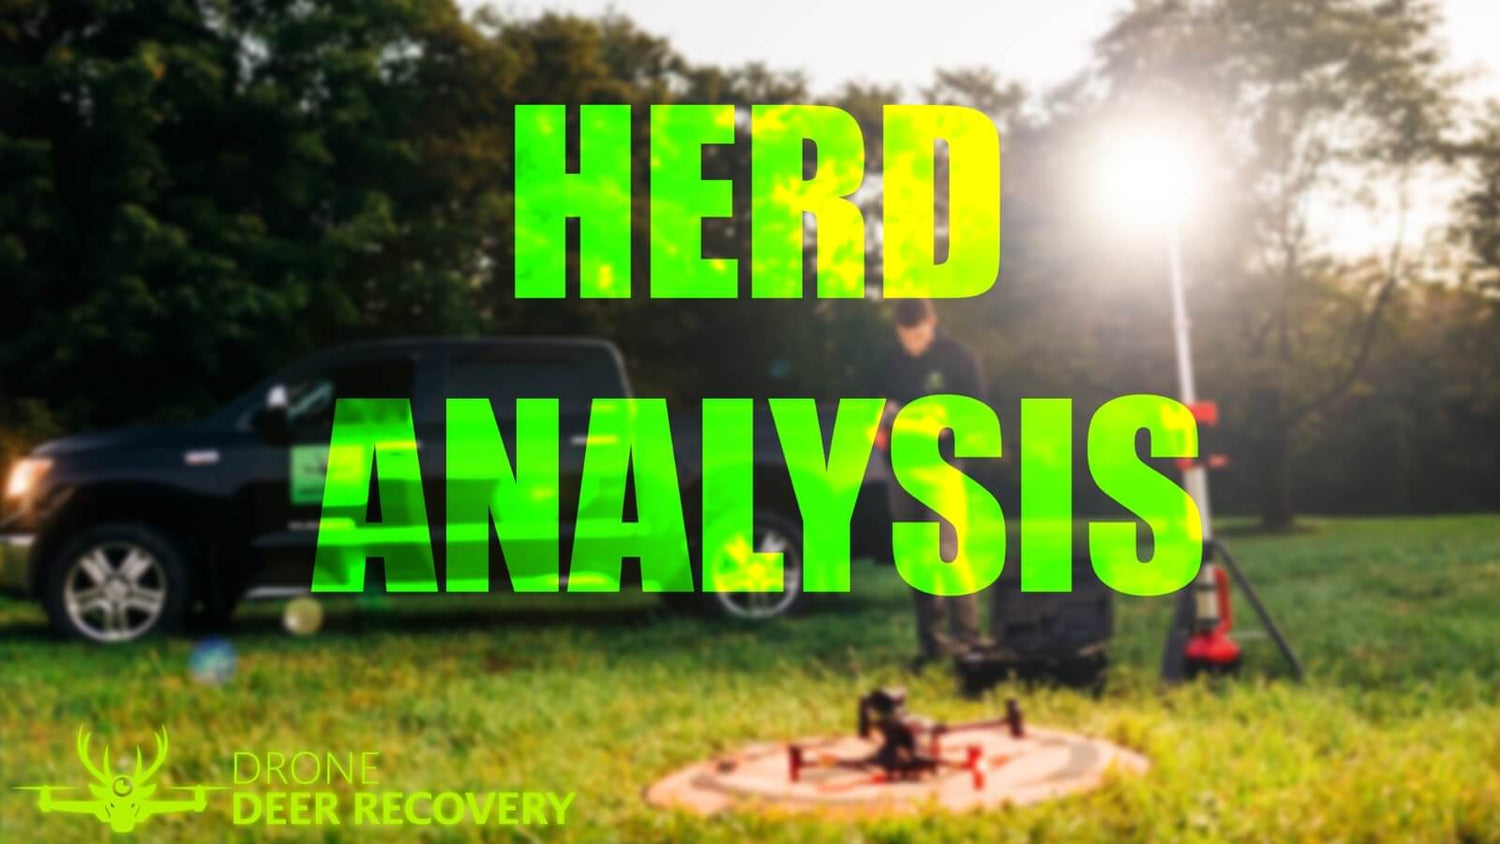 Drone Deer Recovery’s Herd Analysis and Its Application Elsewhere